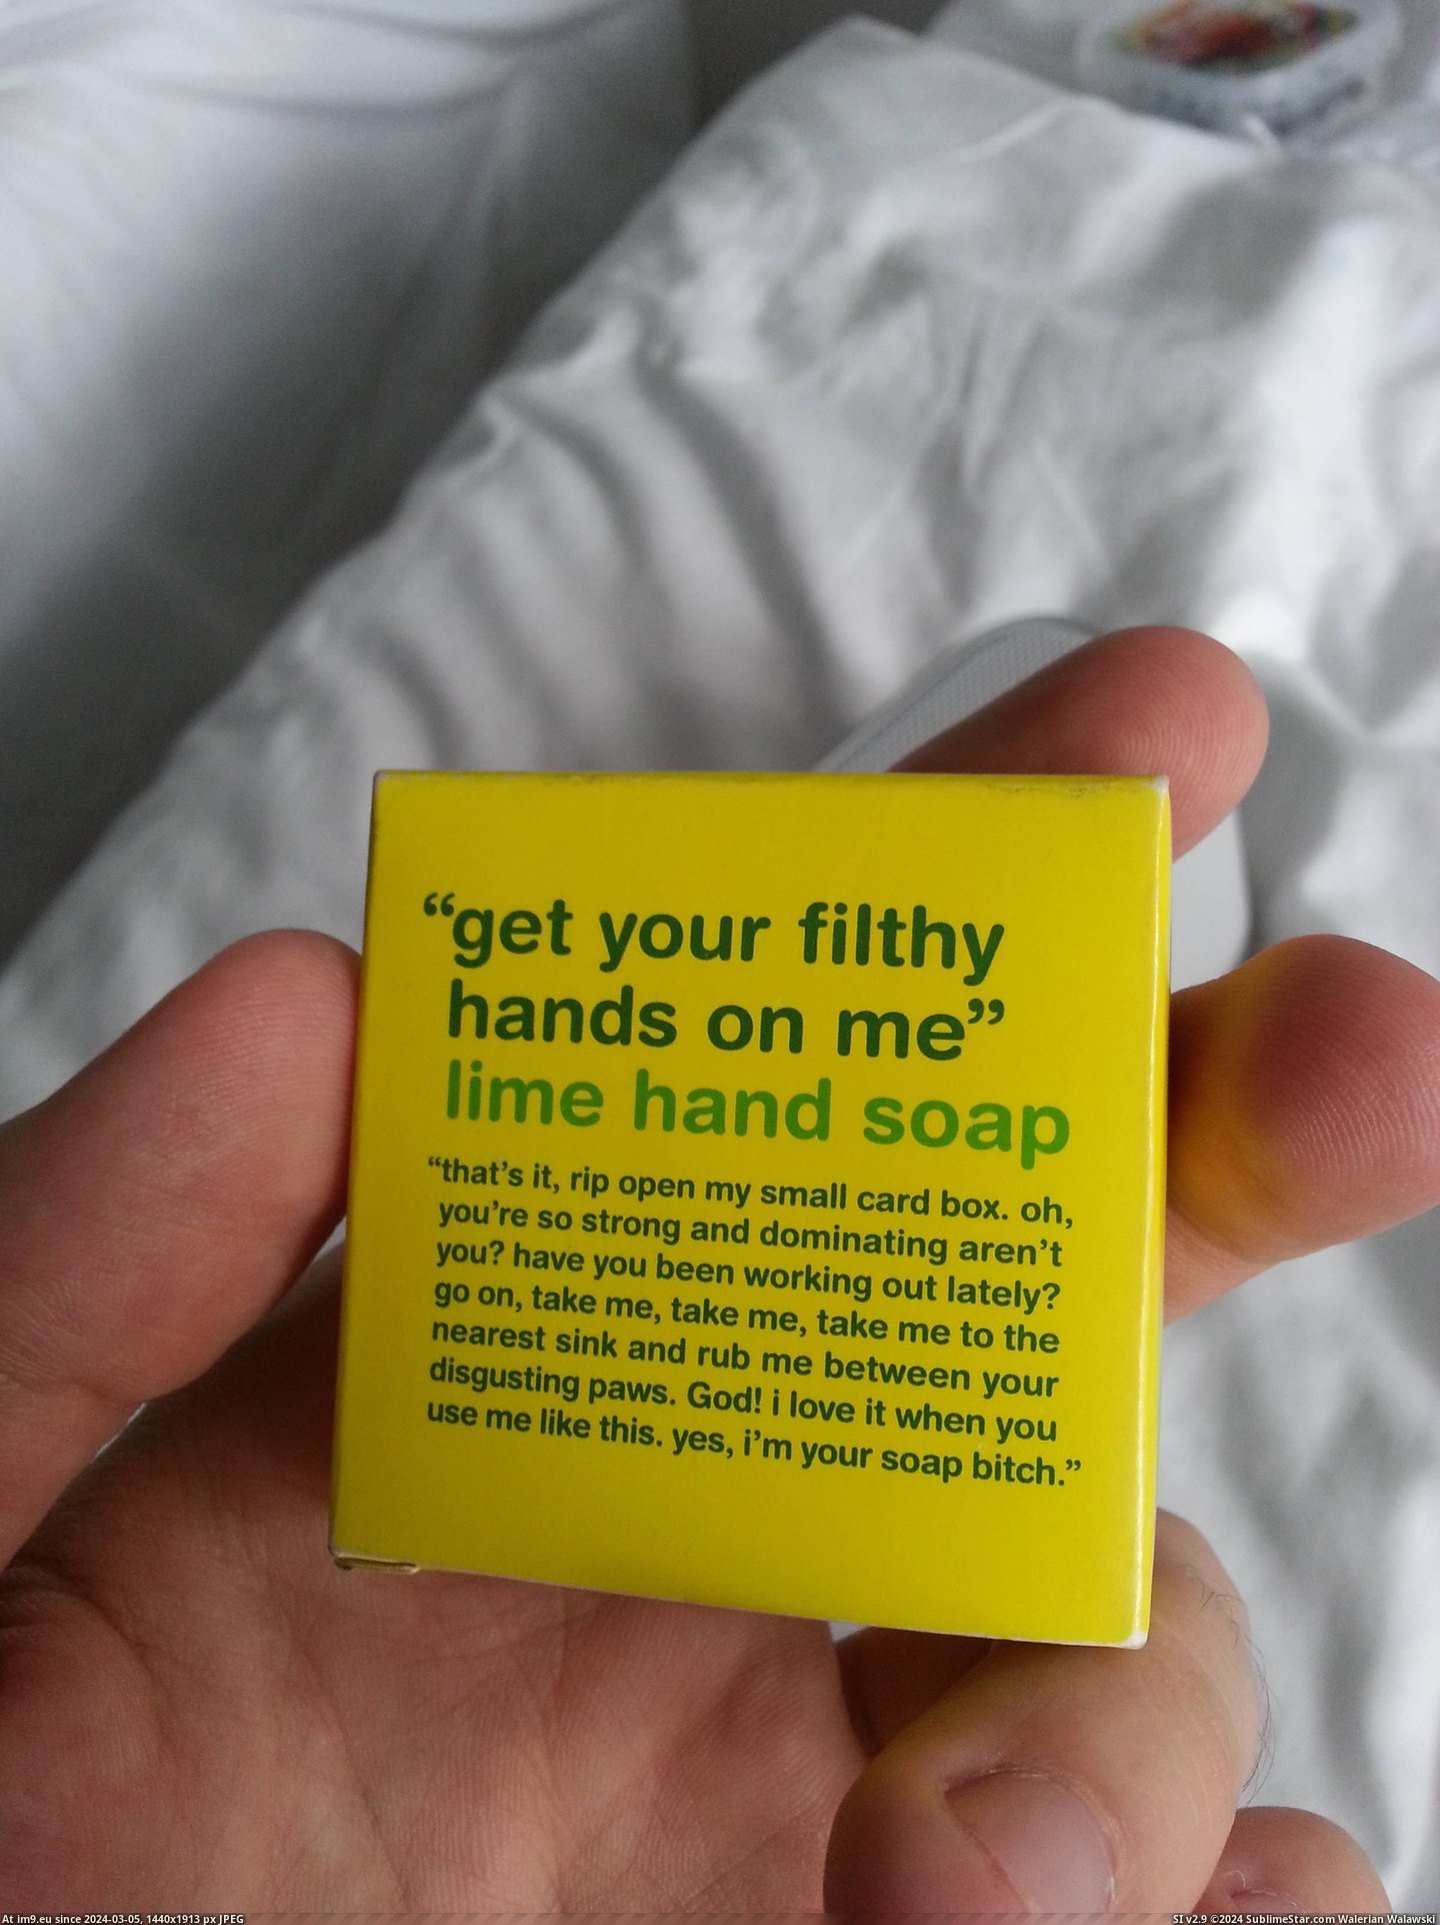 #Funny #Soap #Amsterdam #Horny [Funny] Even the soap is horny in Amsterdam Pic. (Image of album My r/FUNNY favs))